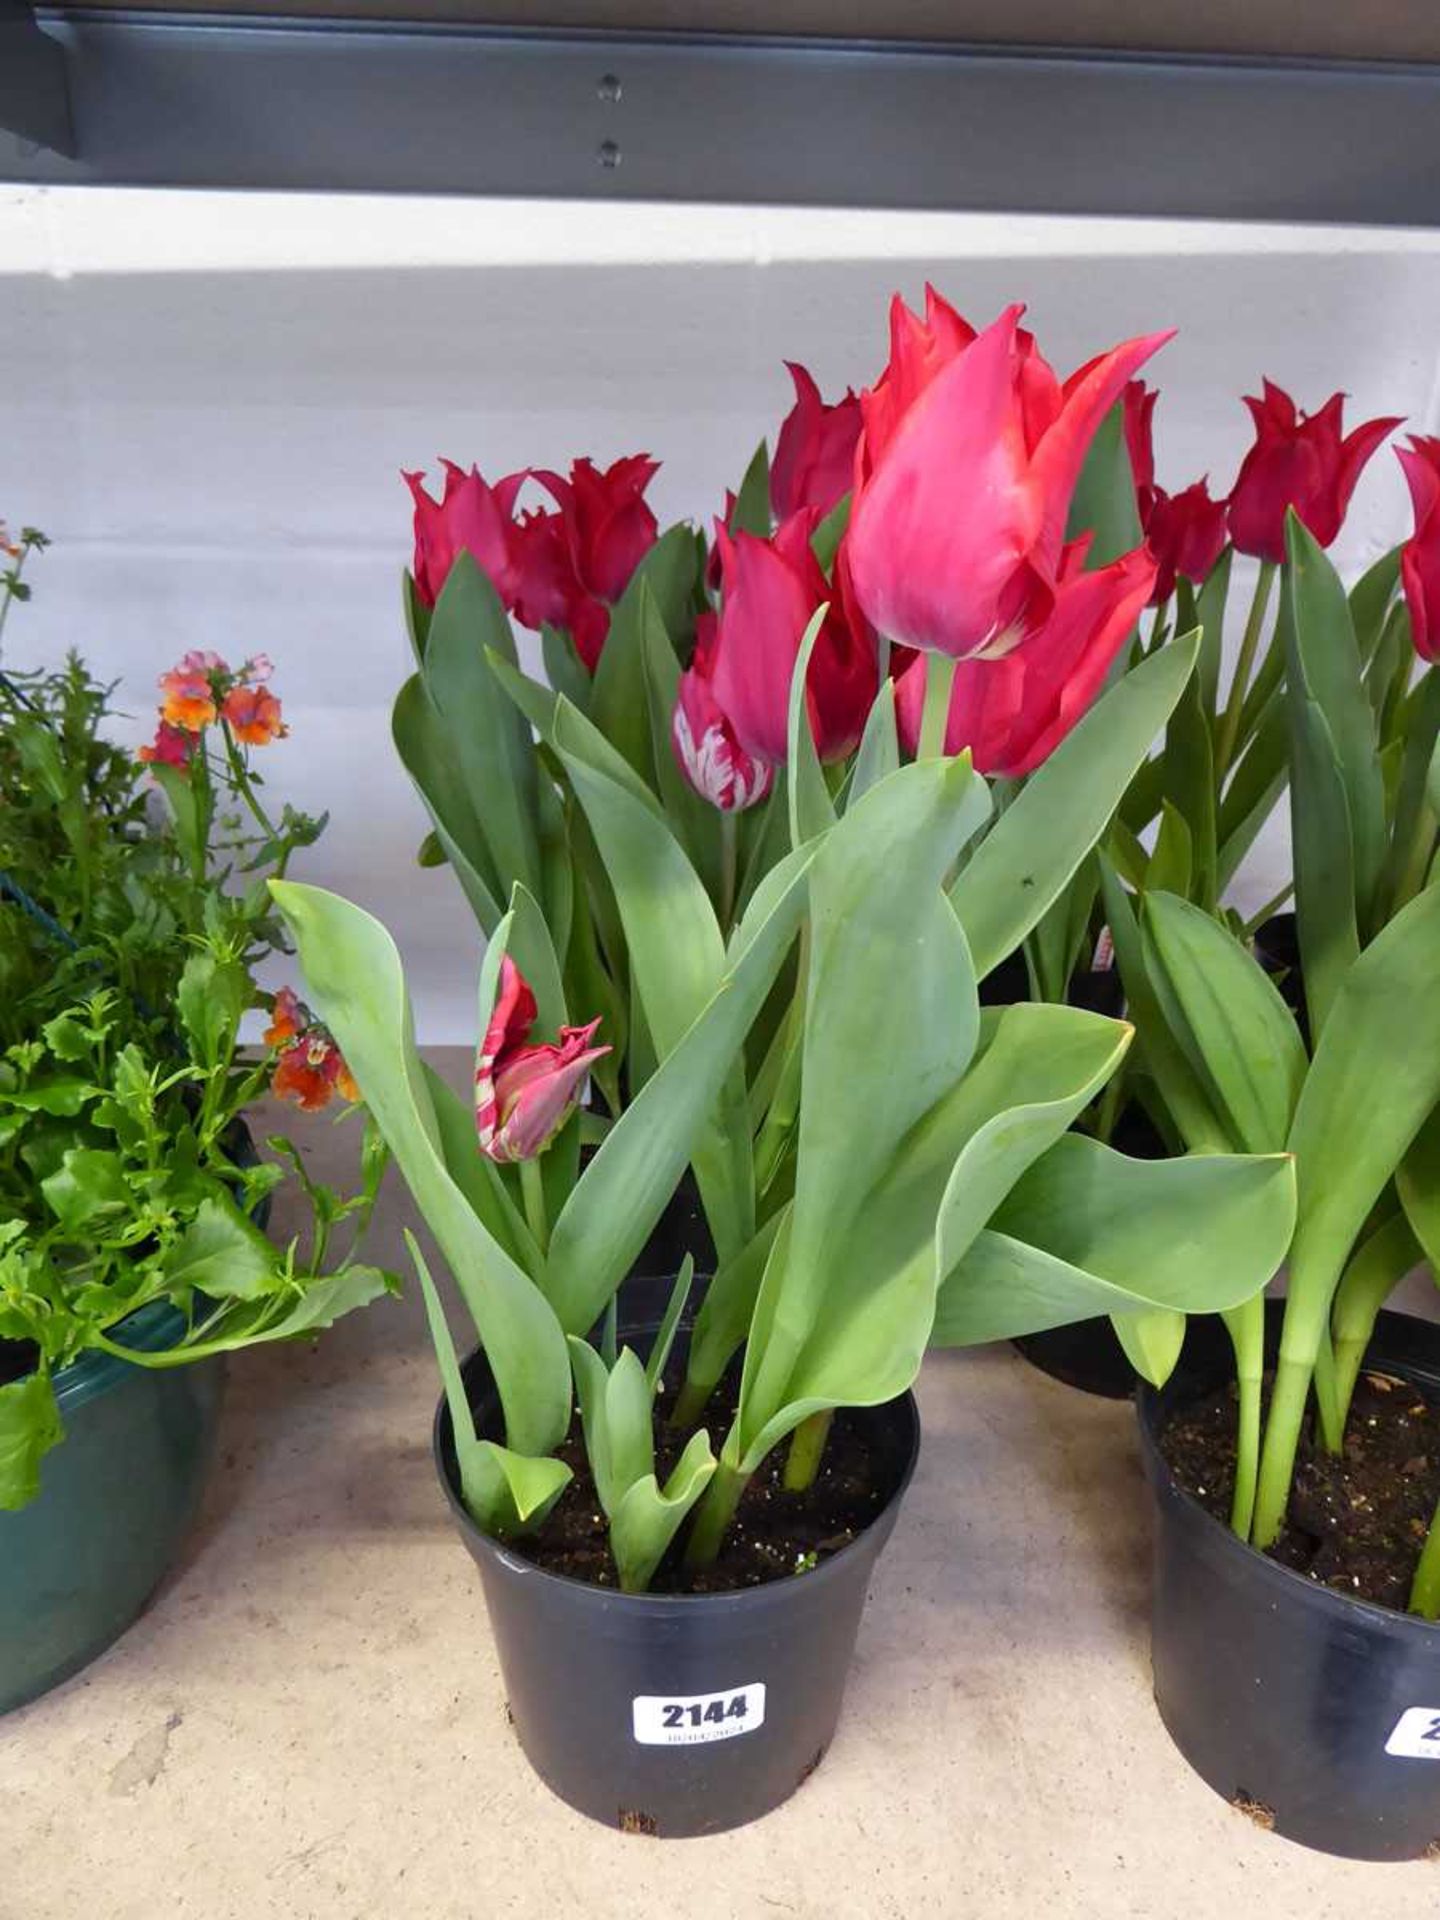 3 potted tulip planters